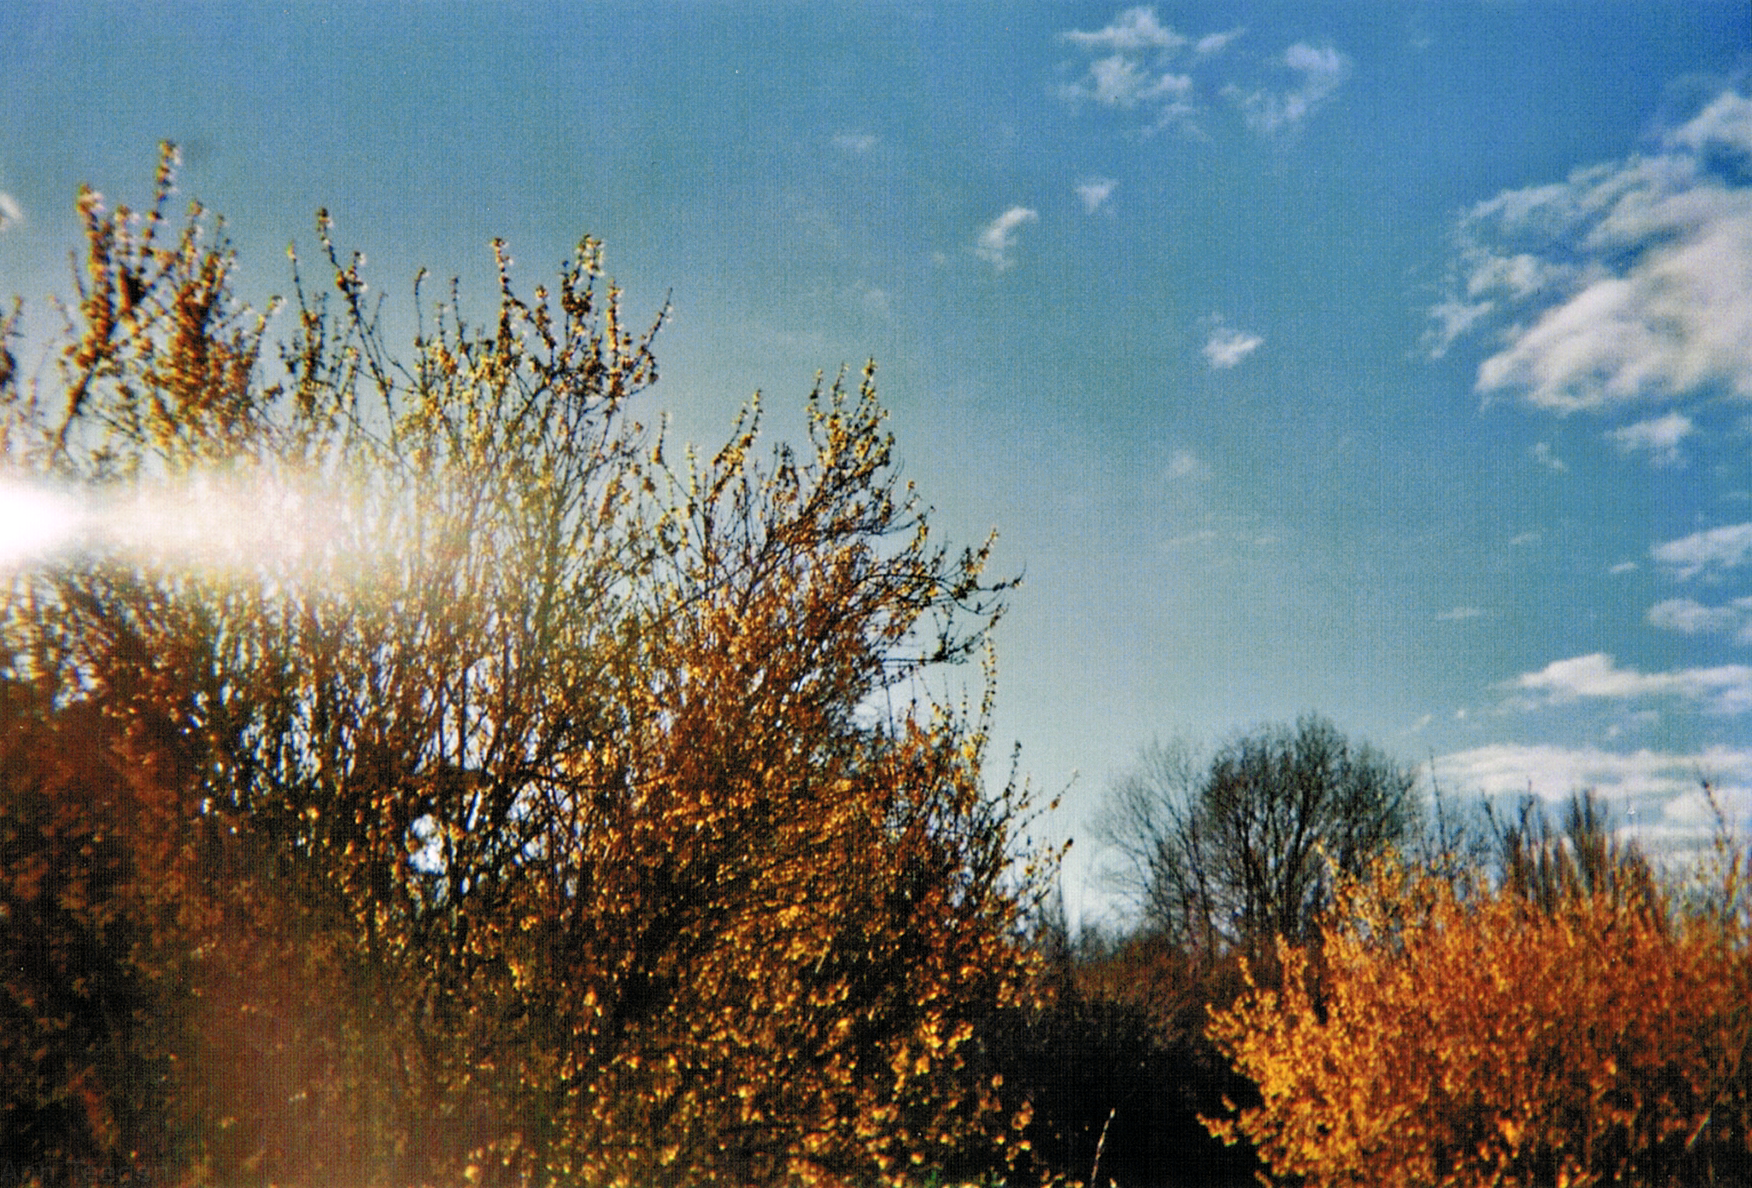 Film photo of yellow blooming bushes on a sunny day